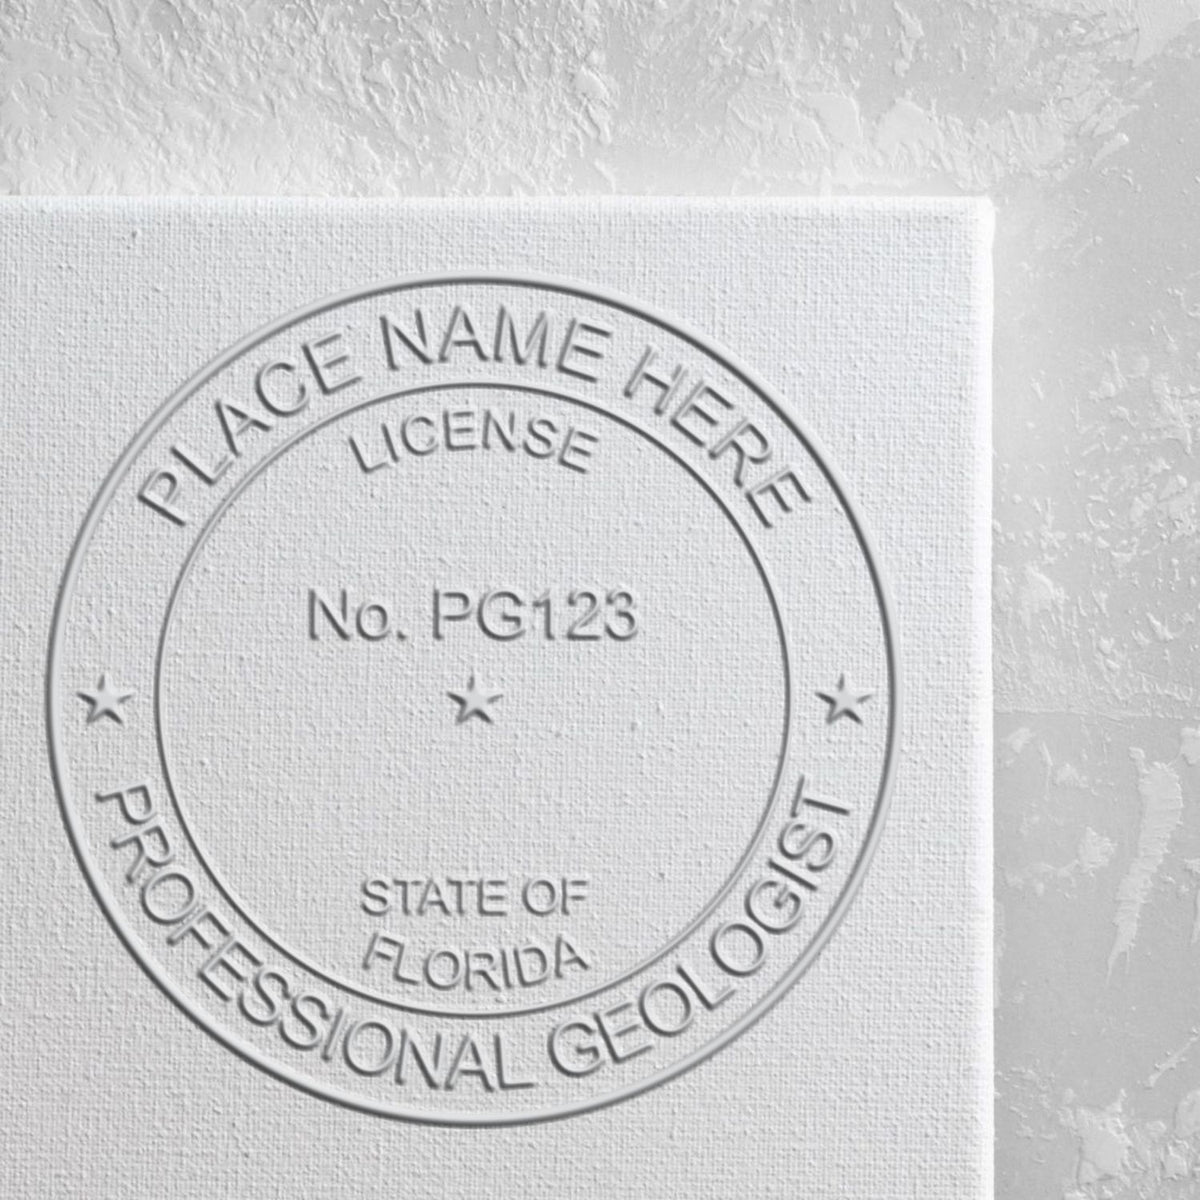 An alternative view of the State of Florida Extended Long Reach Geologist Seal stamped on a sheet of paper showing the image in use